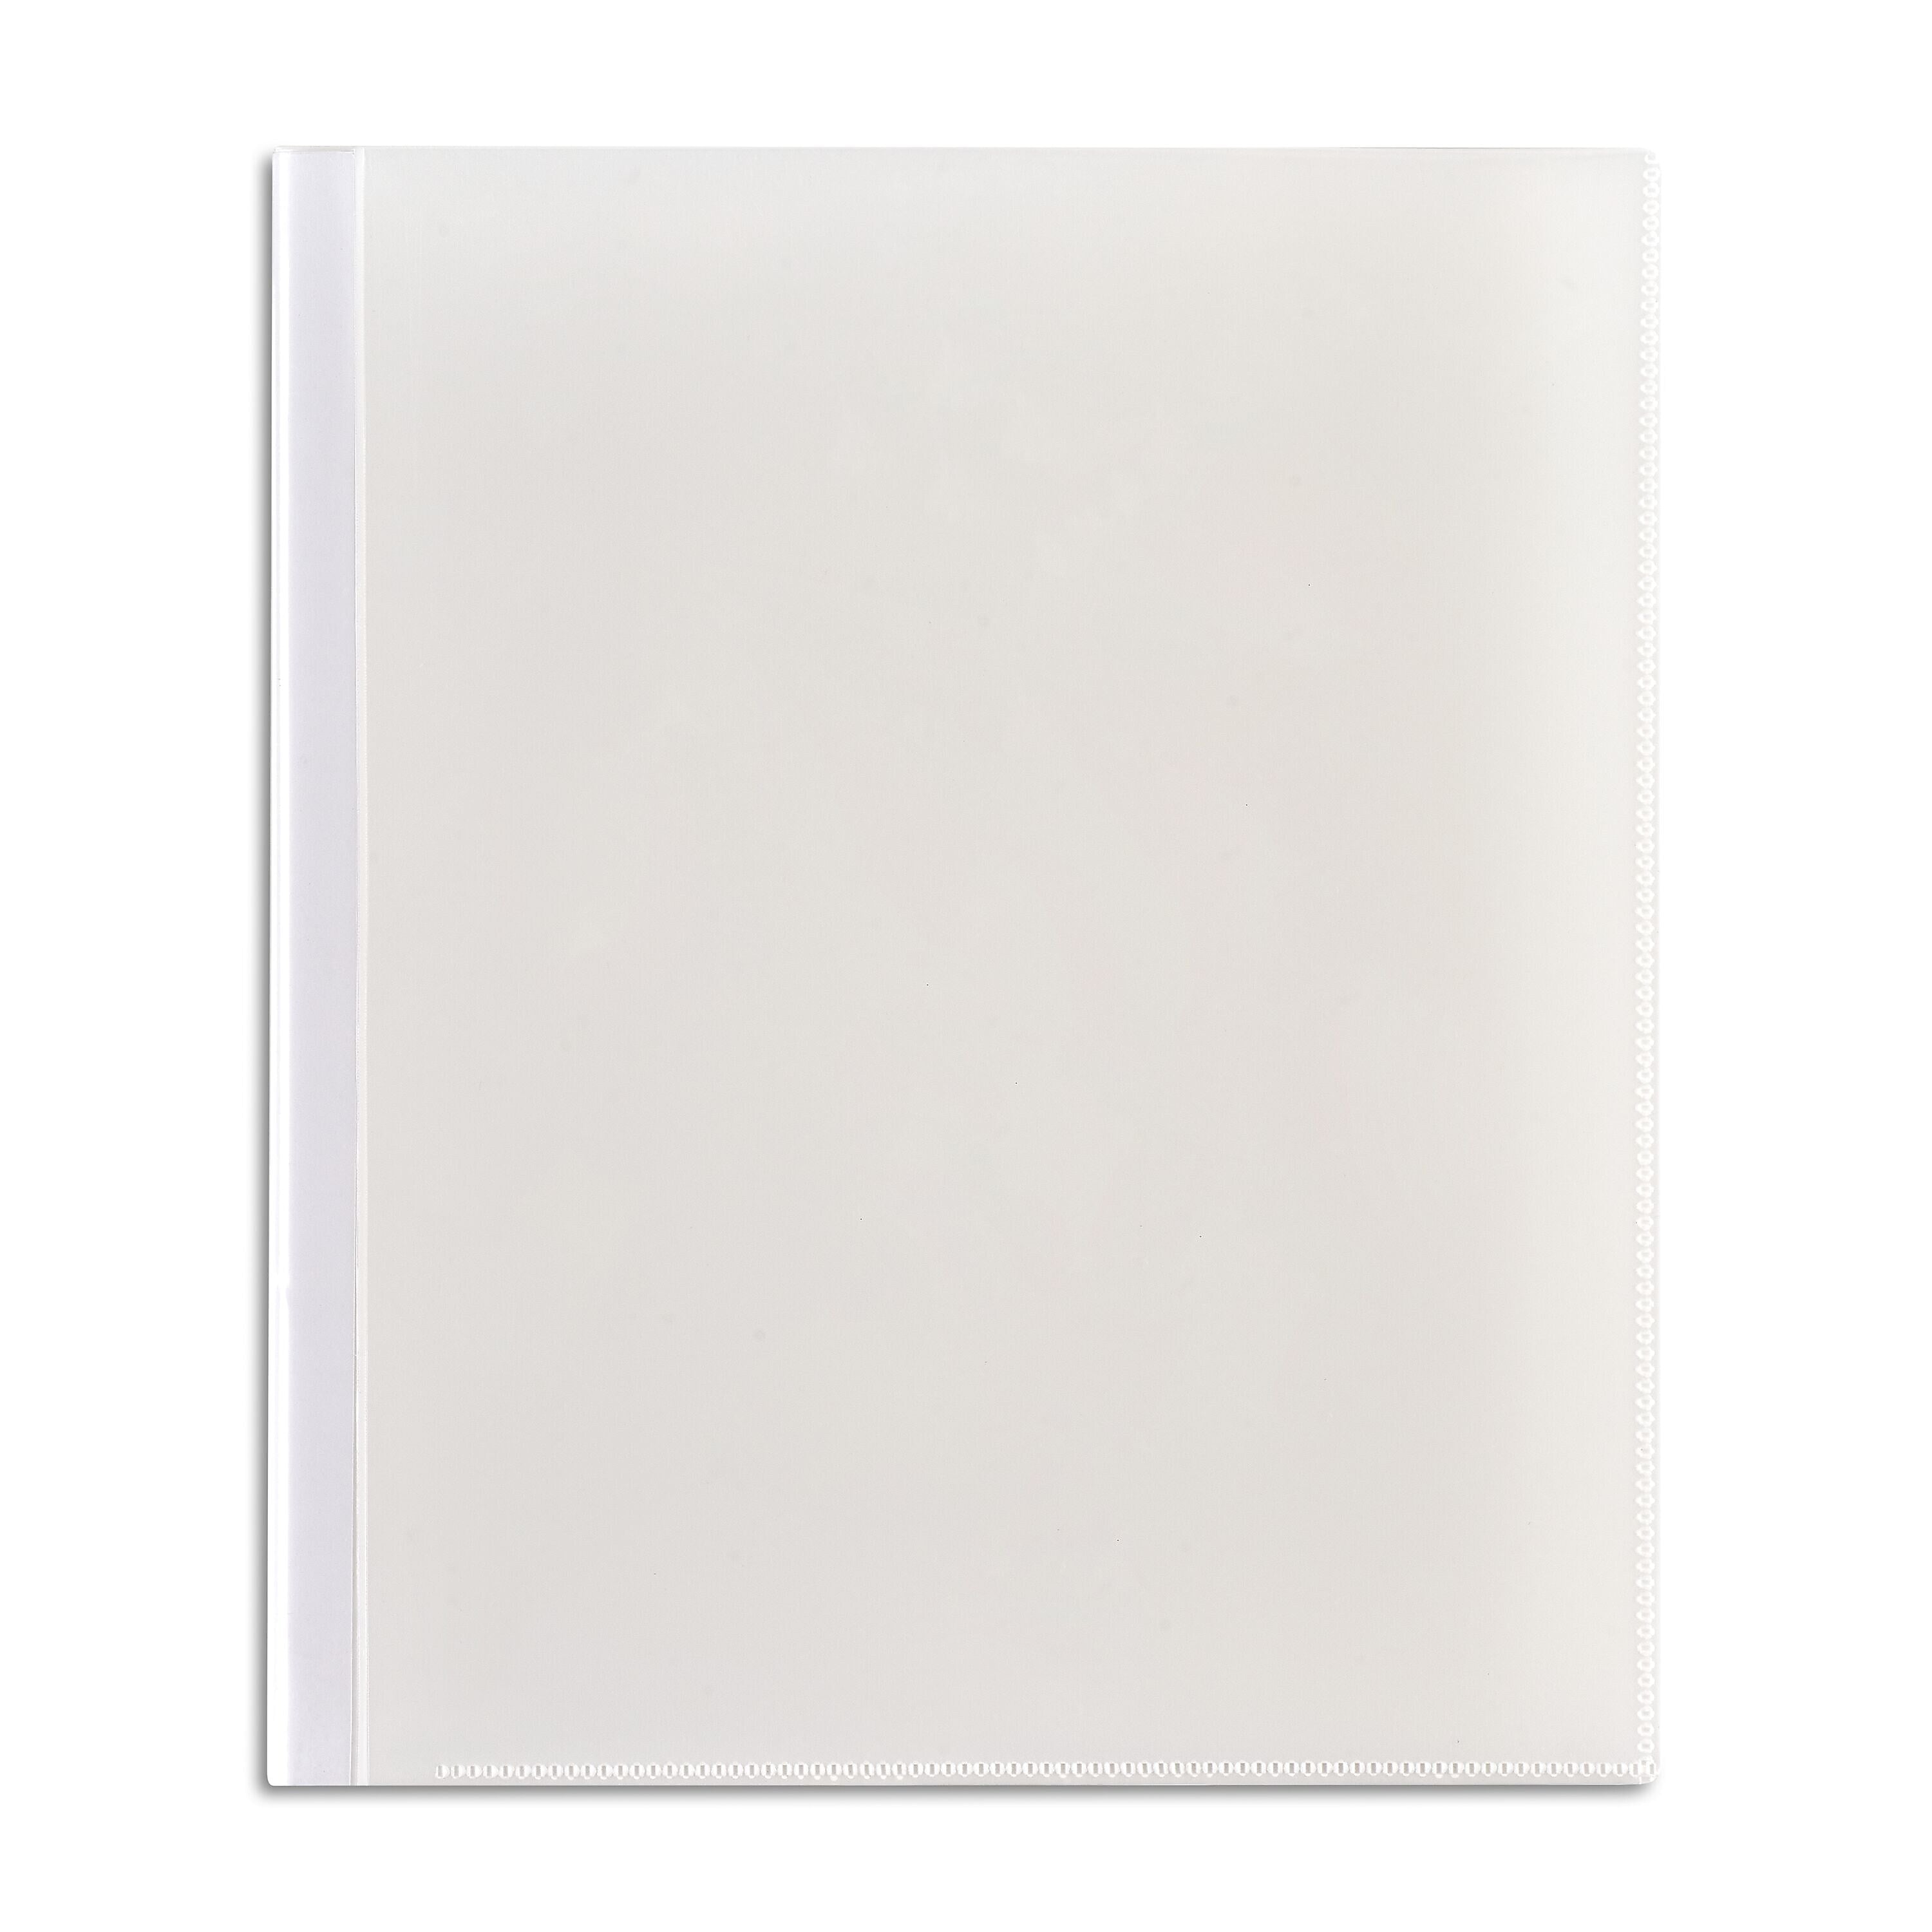 Staples Letter Clear Cover Presentation Book, White